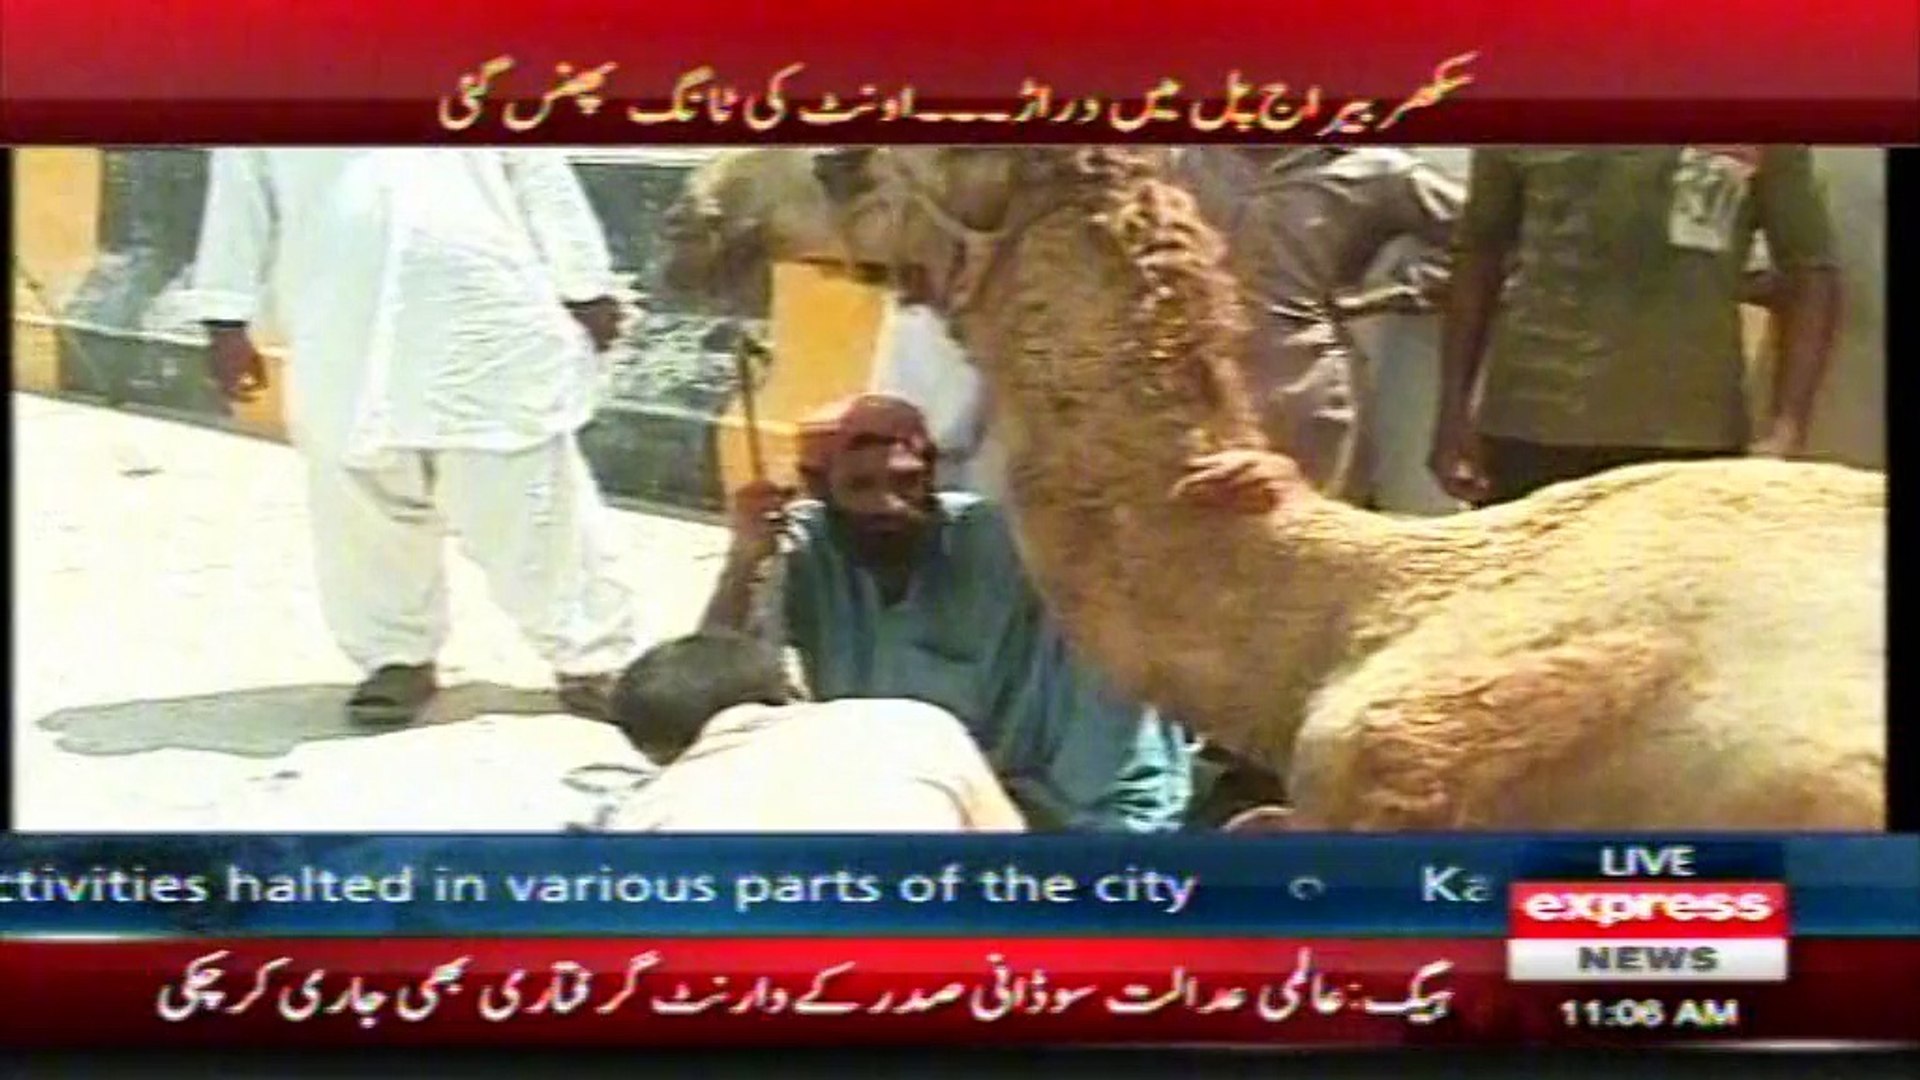 Latest News about camel at express news